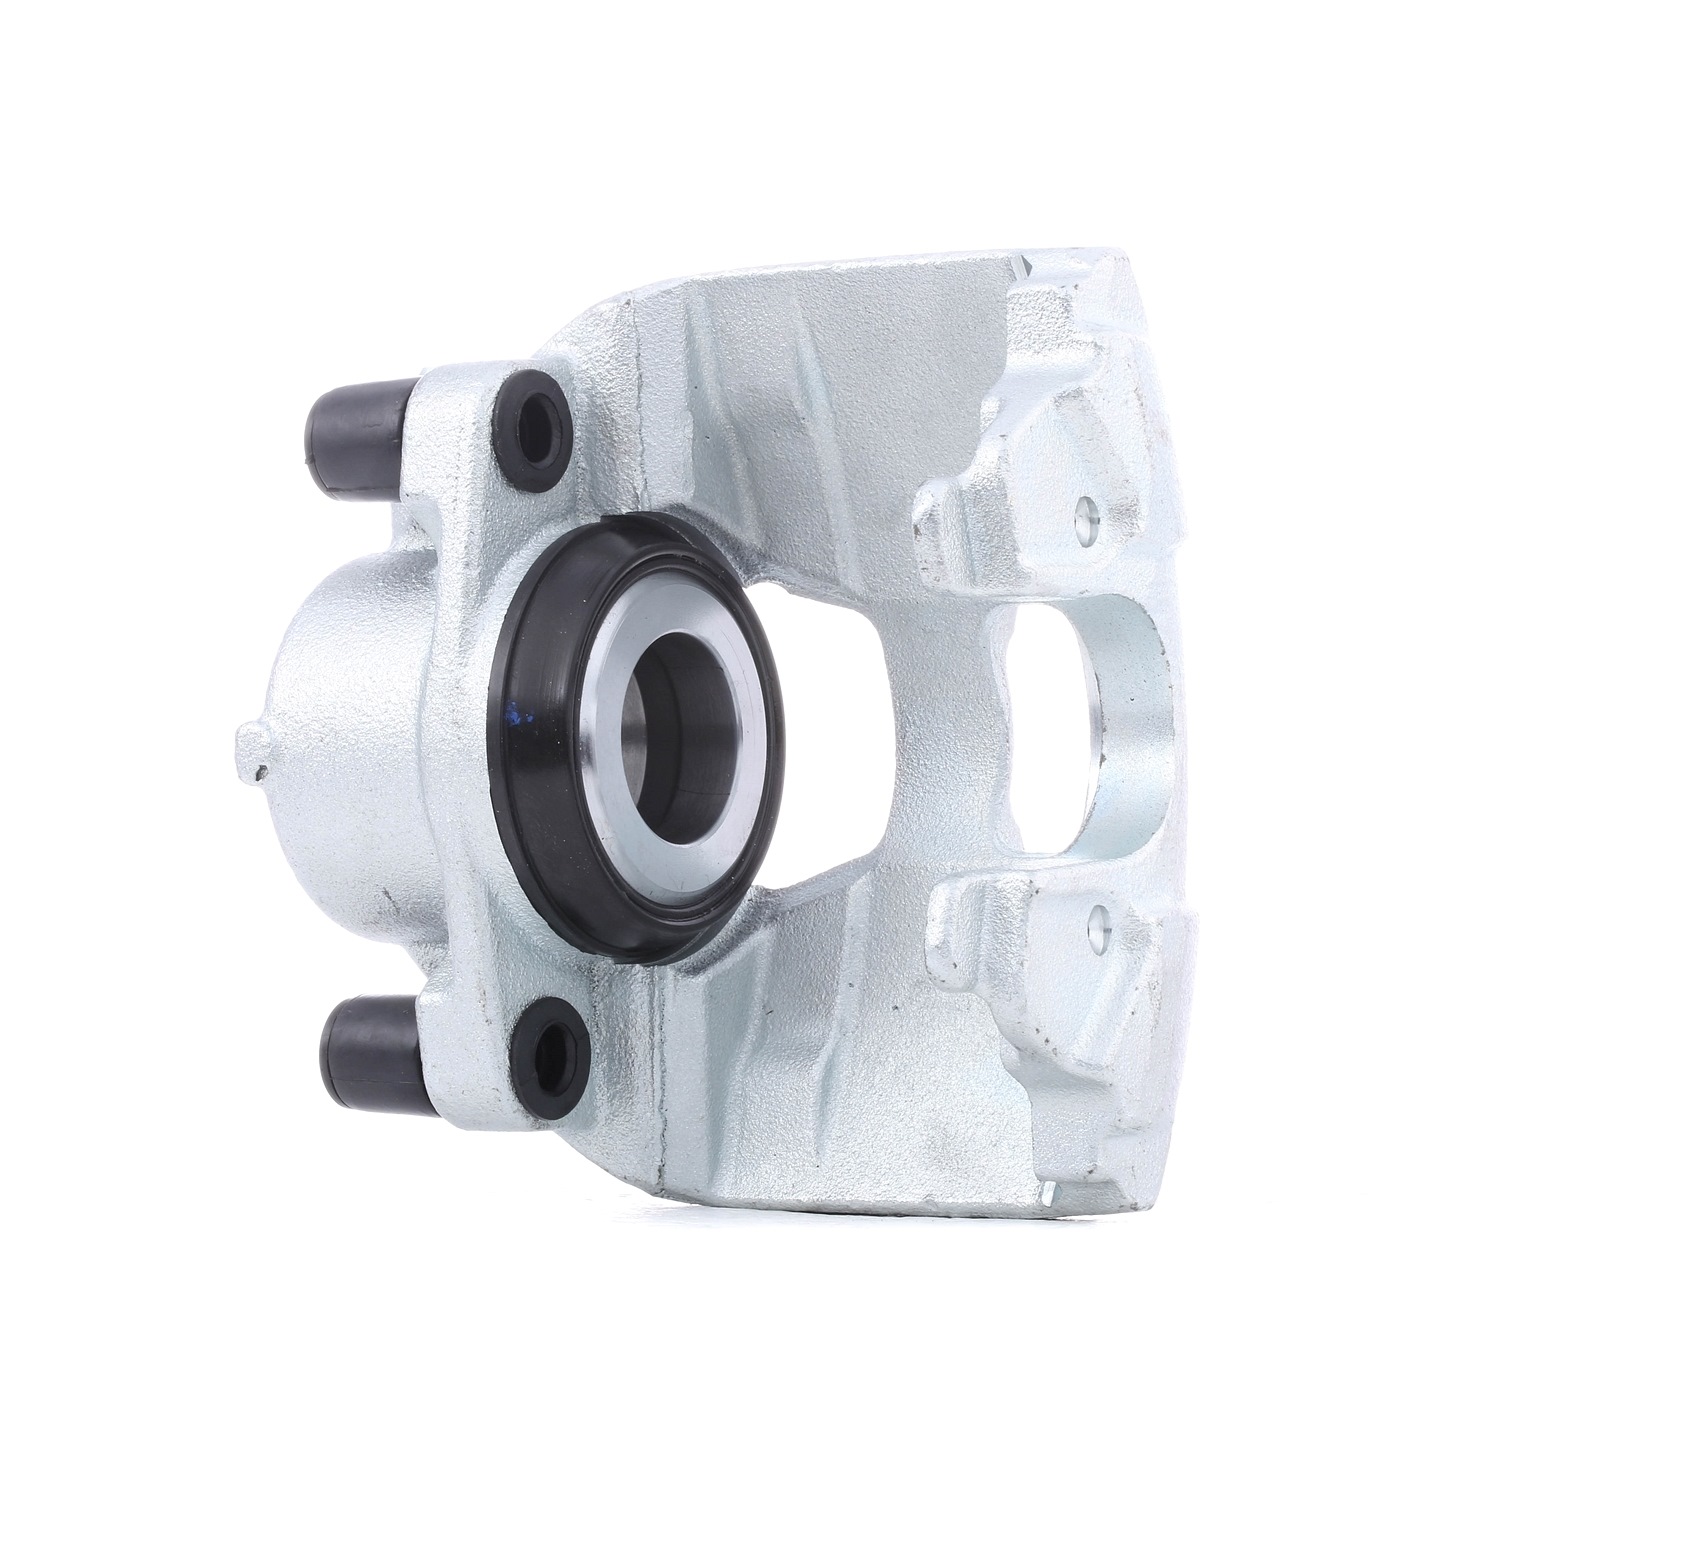 STARK SKBC-0460501 Brake caliper Aluminium/Grey Cast Iron, Front Axle Right, in front of axle, without holder